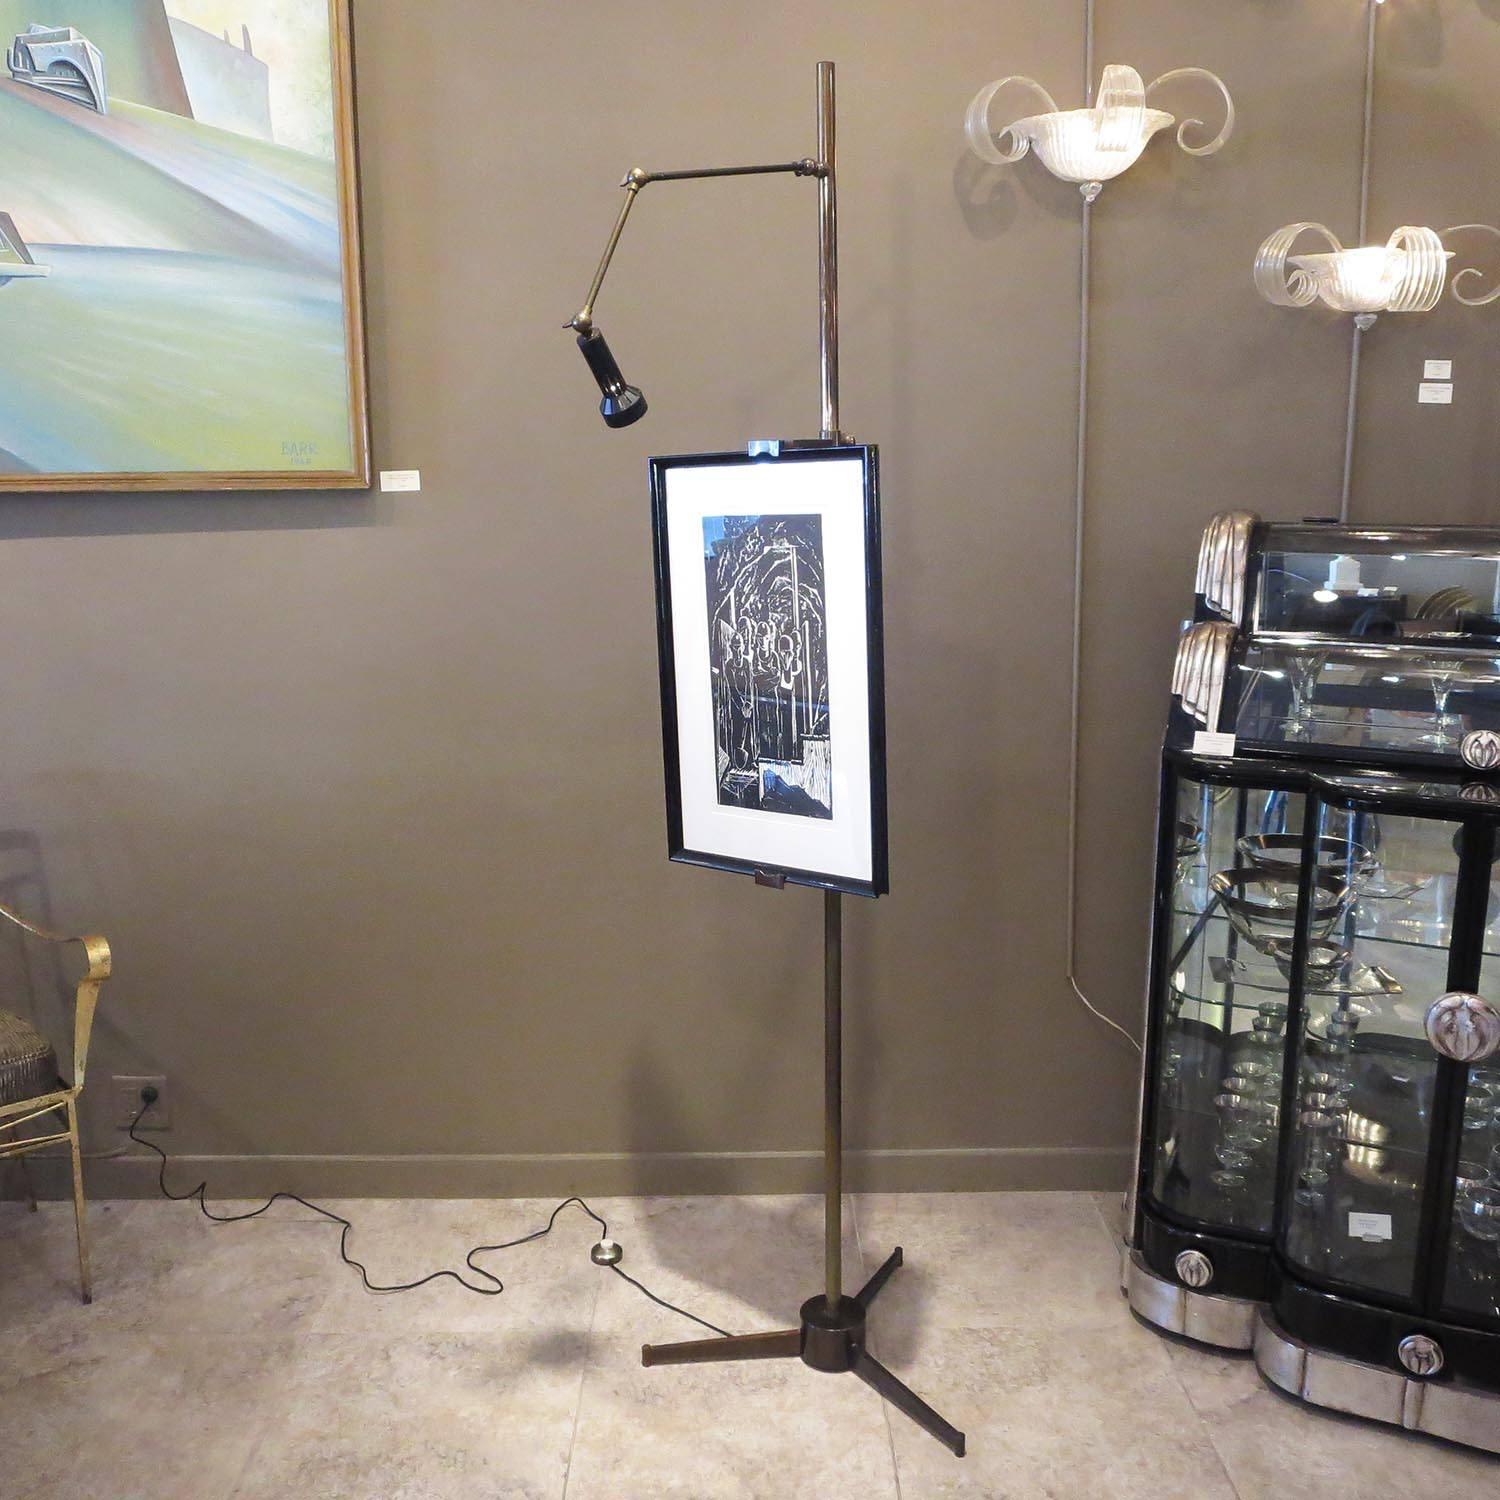 A very fine example of the iconic easel by Angelo Lelli of Italy. The easel lamp retains original Arredoluce label to the underside. The lamp has multiple adjustments to direct the light to any size artwork. Each support arm for the artwork are also